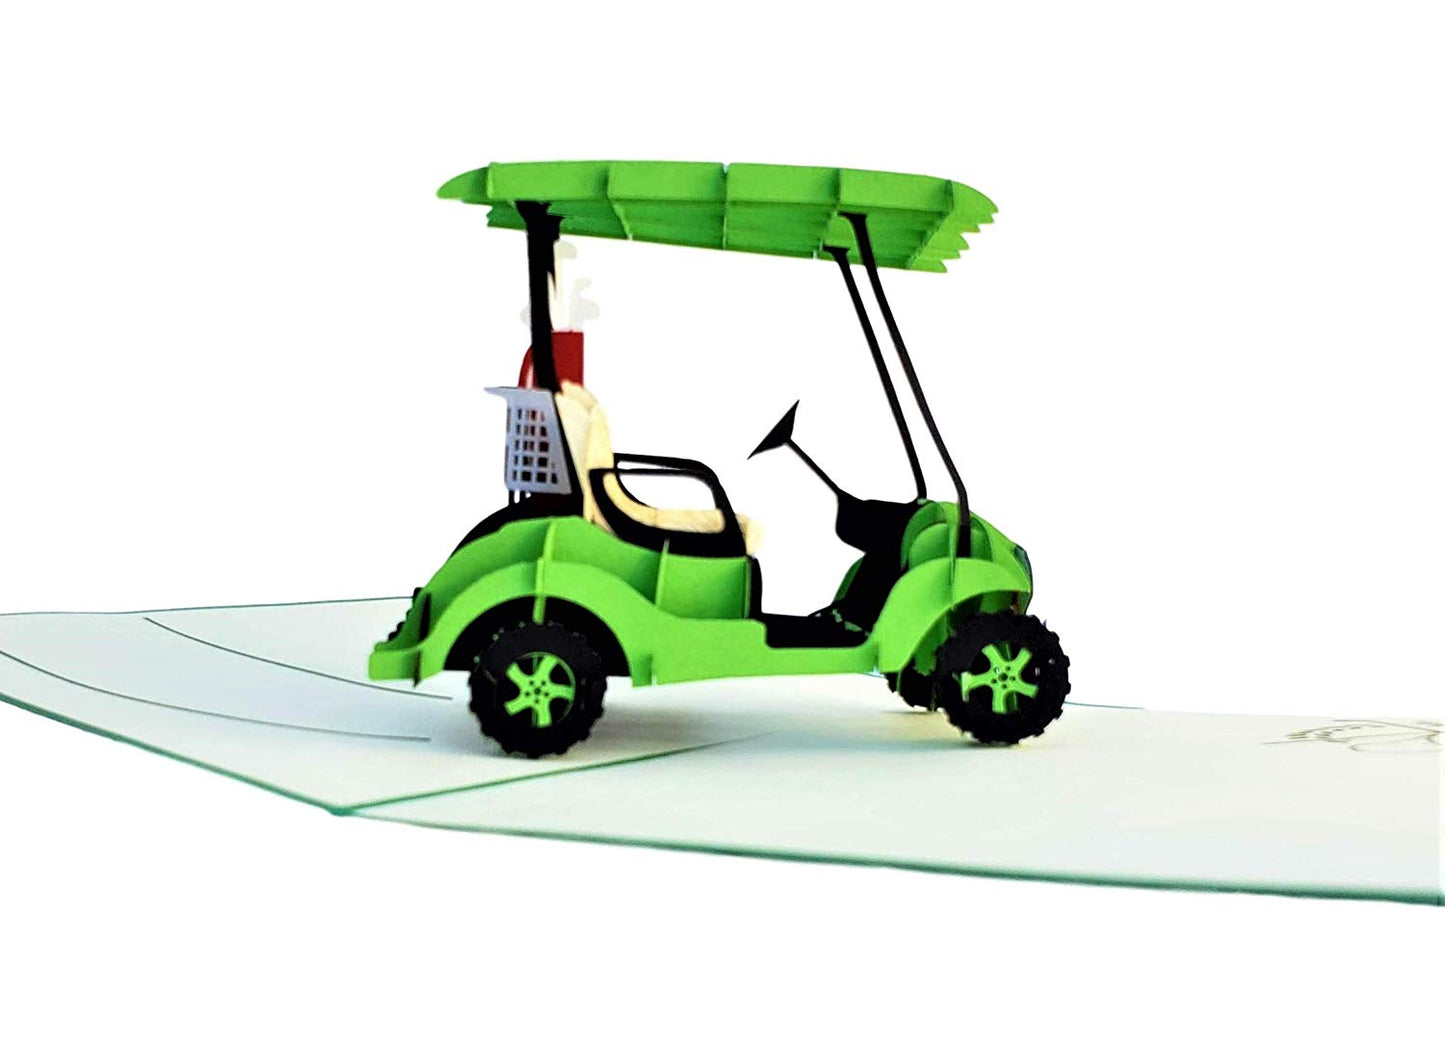 Green Golf Cart 3D Pop Up Greeting Card - Fun - Green - Just Because - Special Days - iGifts And Cards